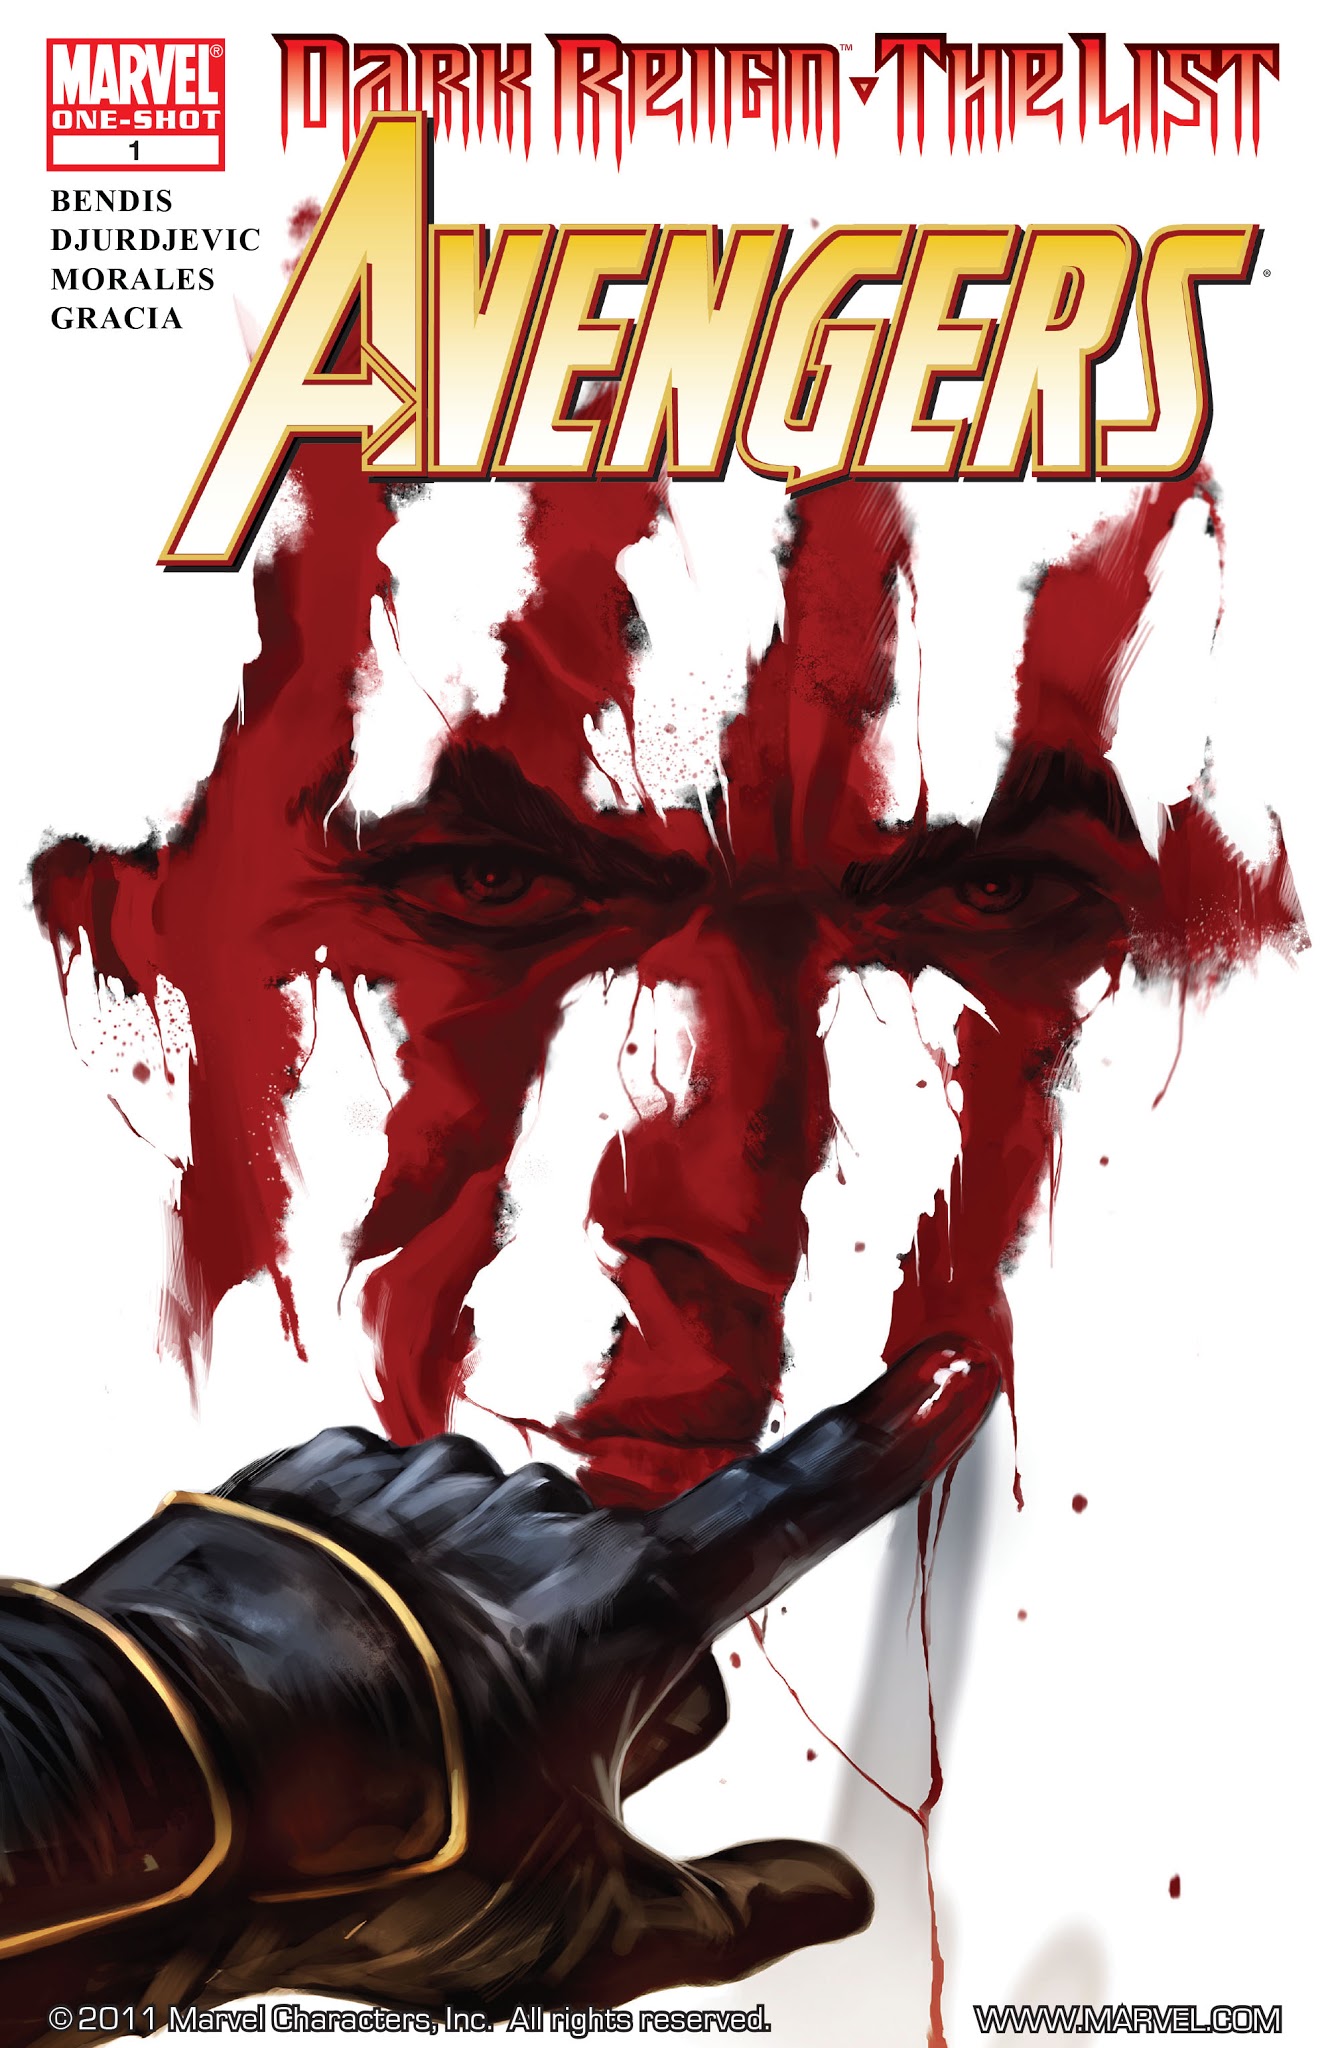 Read online Dark Reign: The List comic -  Issue # Issue Avengers - 1